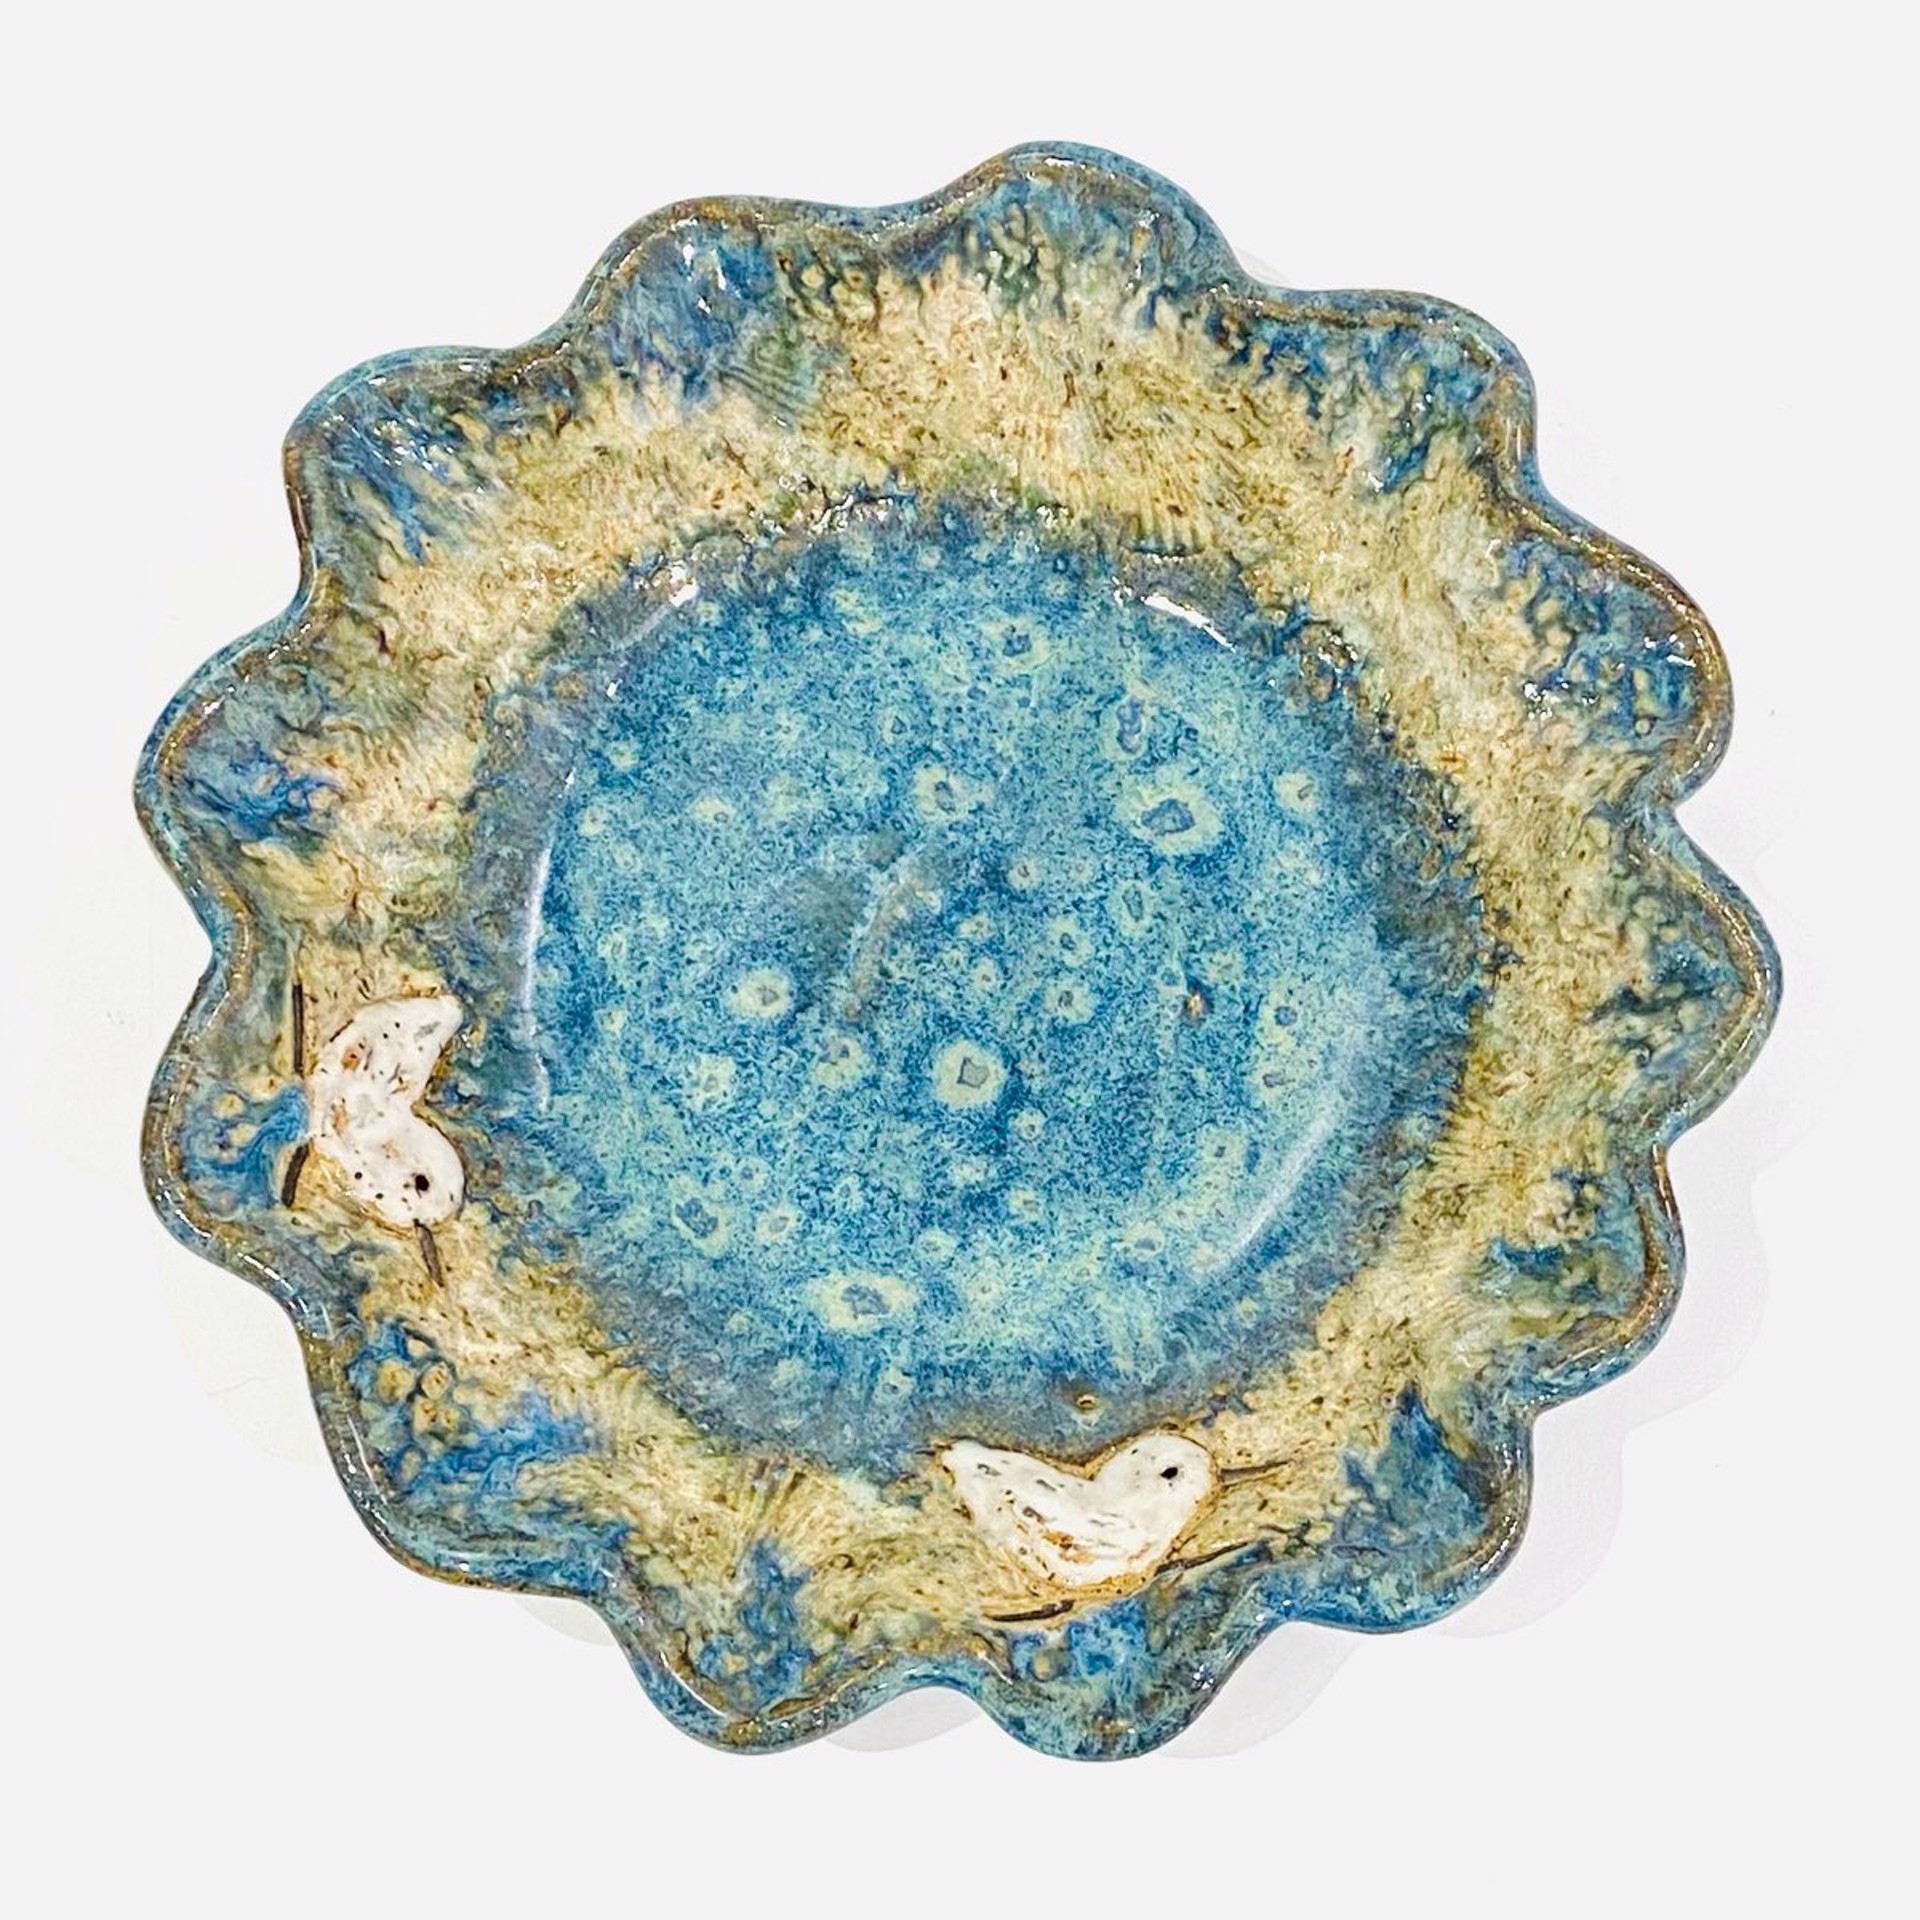 LG22-900 Small Round Scalloped Bowl with Two Sandpiper (Blue Glaze) by Jim & Steffi Logan